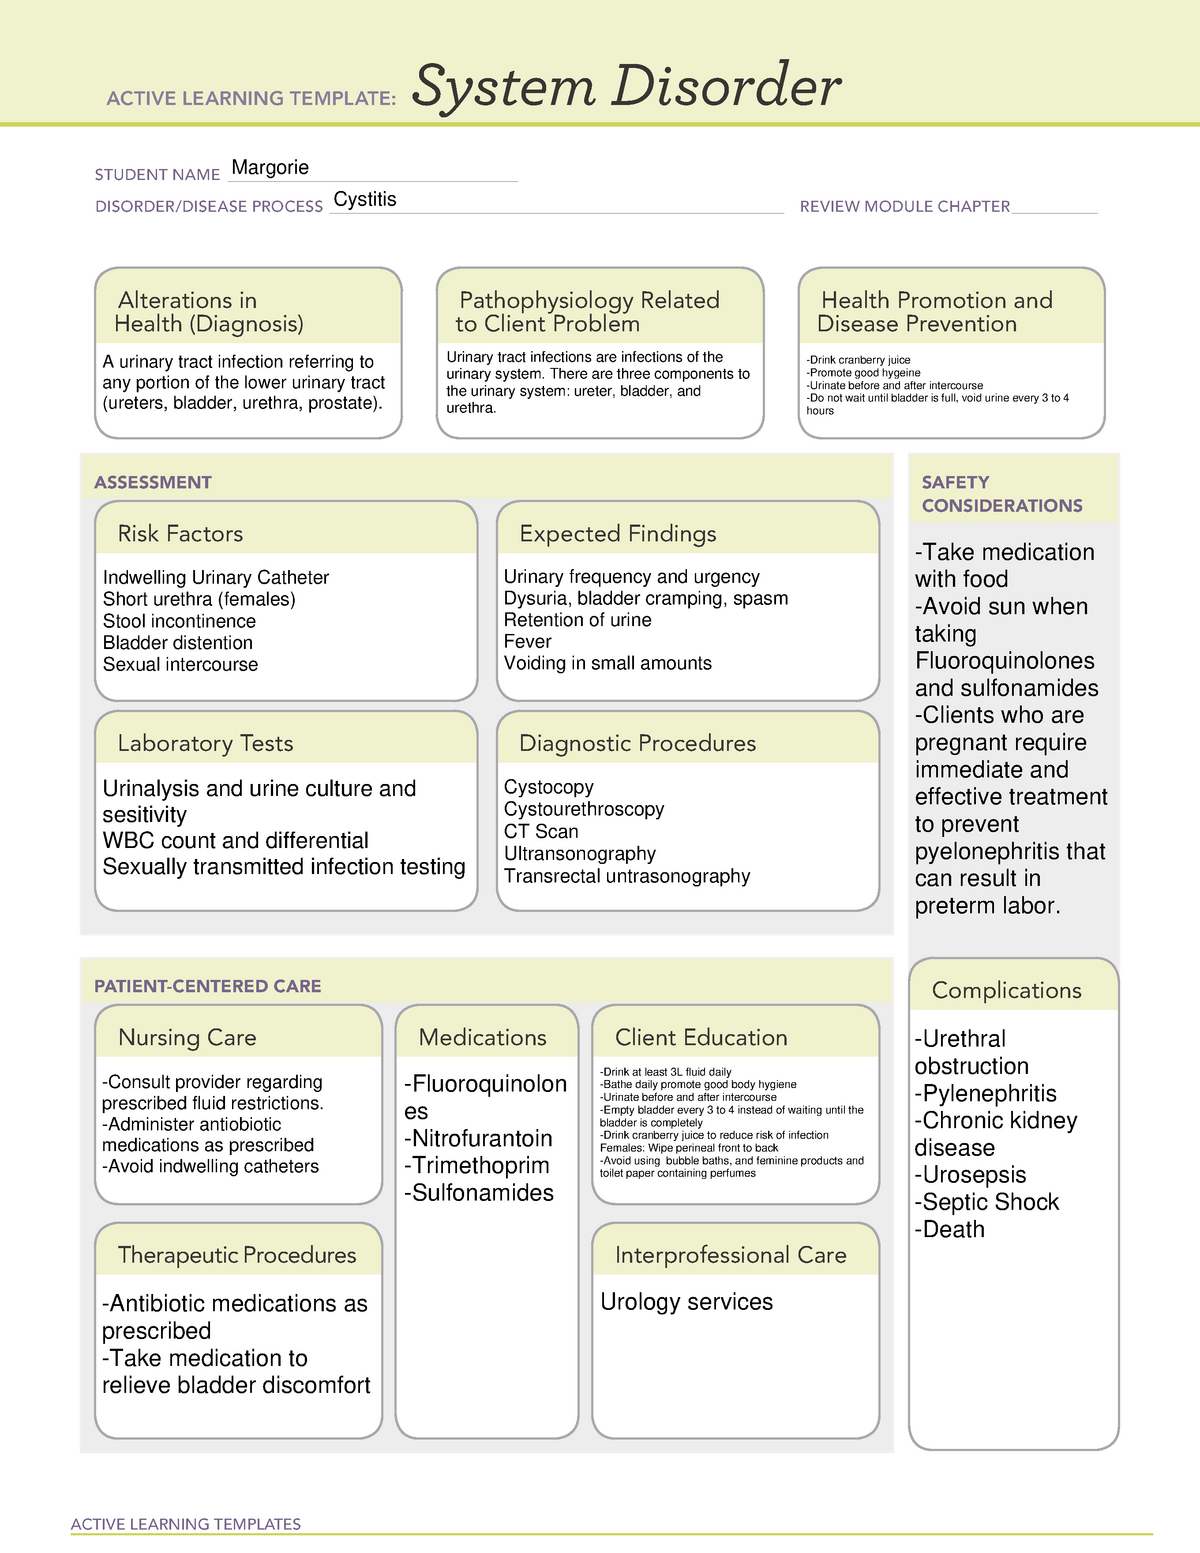 ATI System Disorder Cystitis template - ACTIVE LEARNING TEMPLATES ...